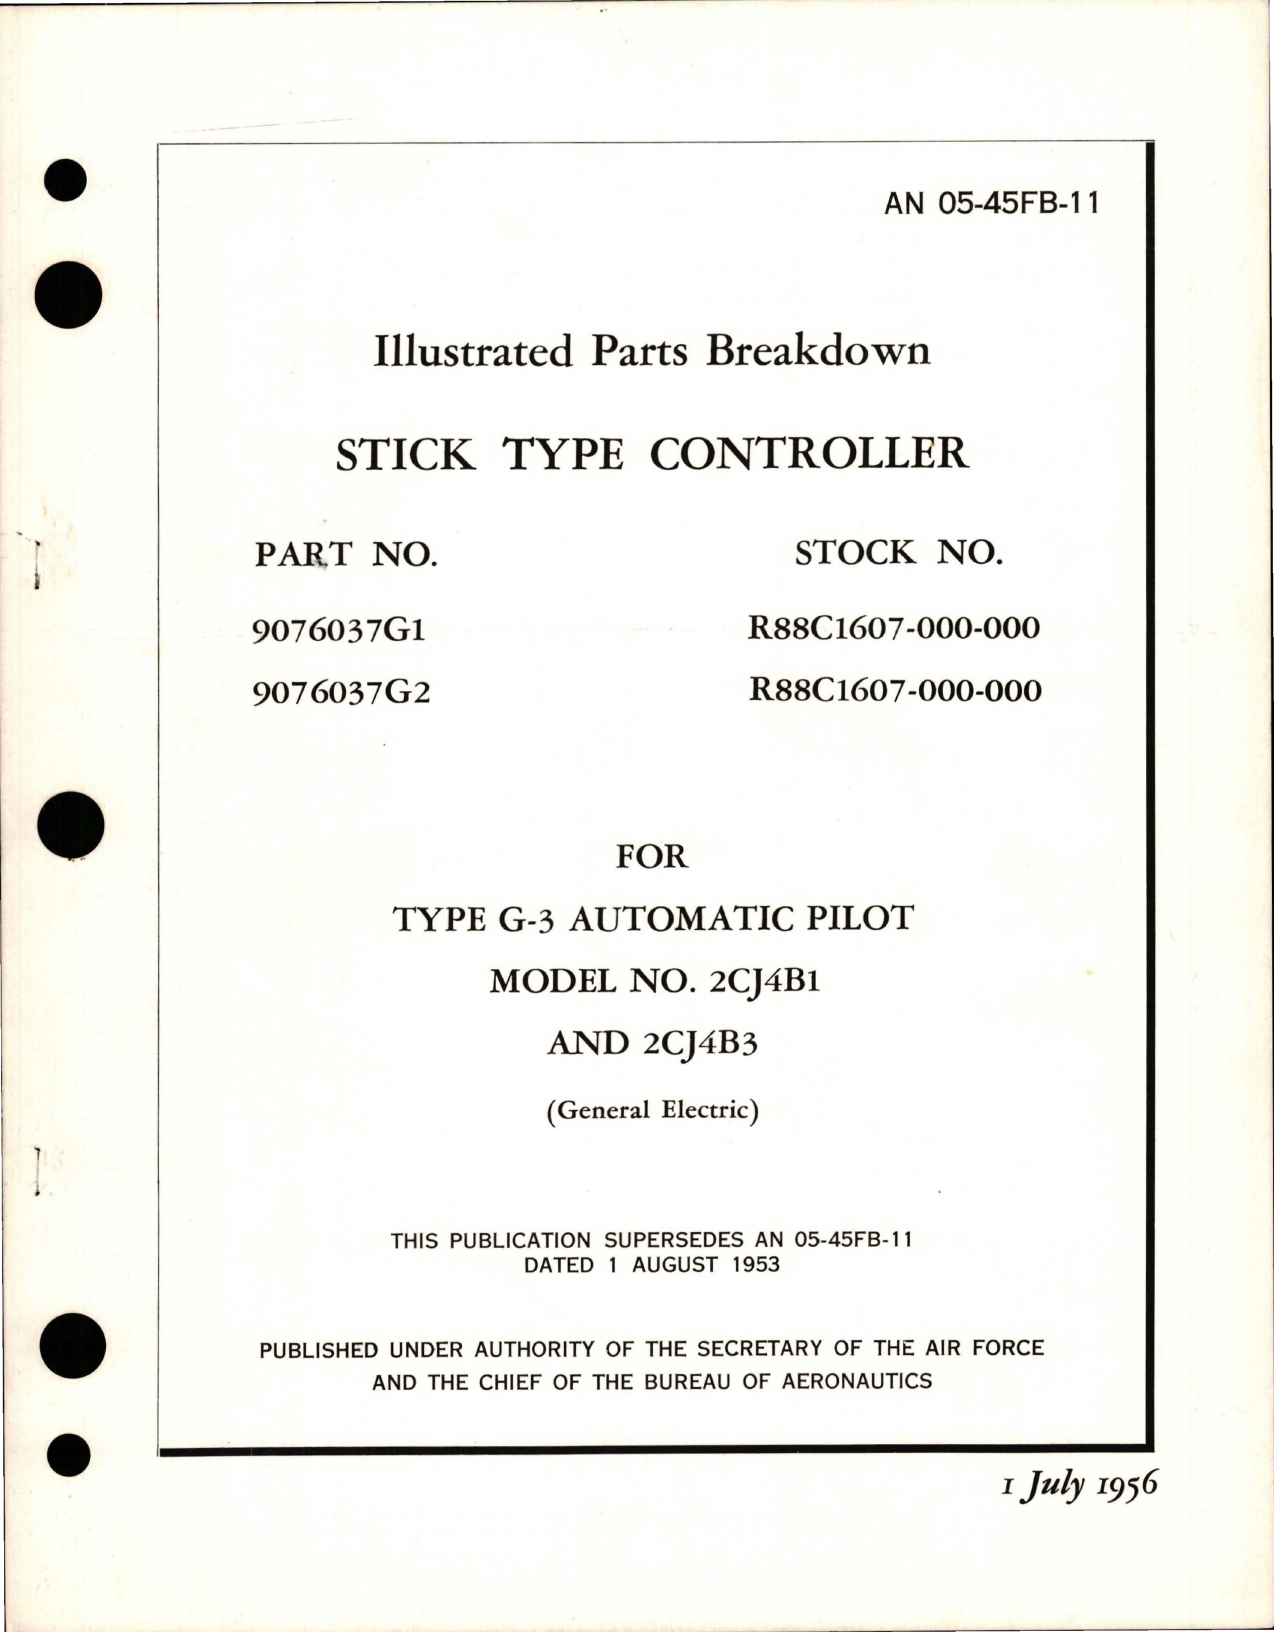 Sample page 1 from AirCorps Library document: Illustrated Parts Breakdown for Stick Type Controller for G-3 Auto Pilot - Models 2CJ4B1 and 2CJ4B3 - Parts 9076037G1 and 9076037G2